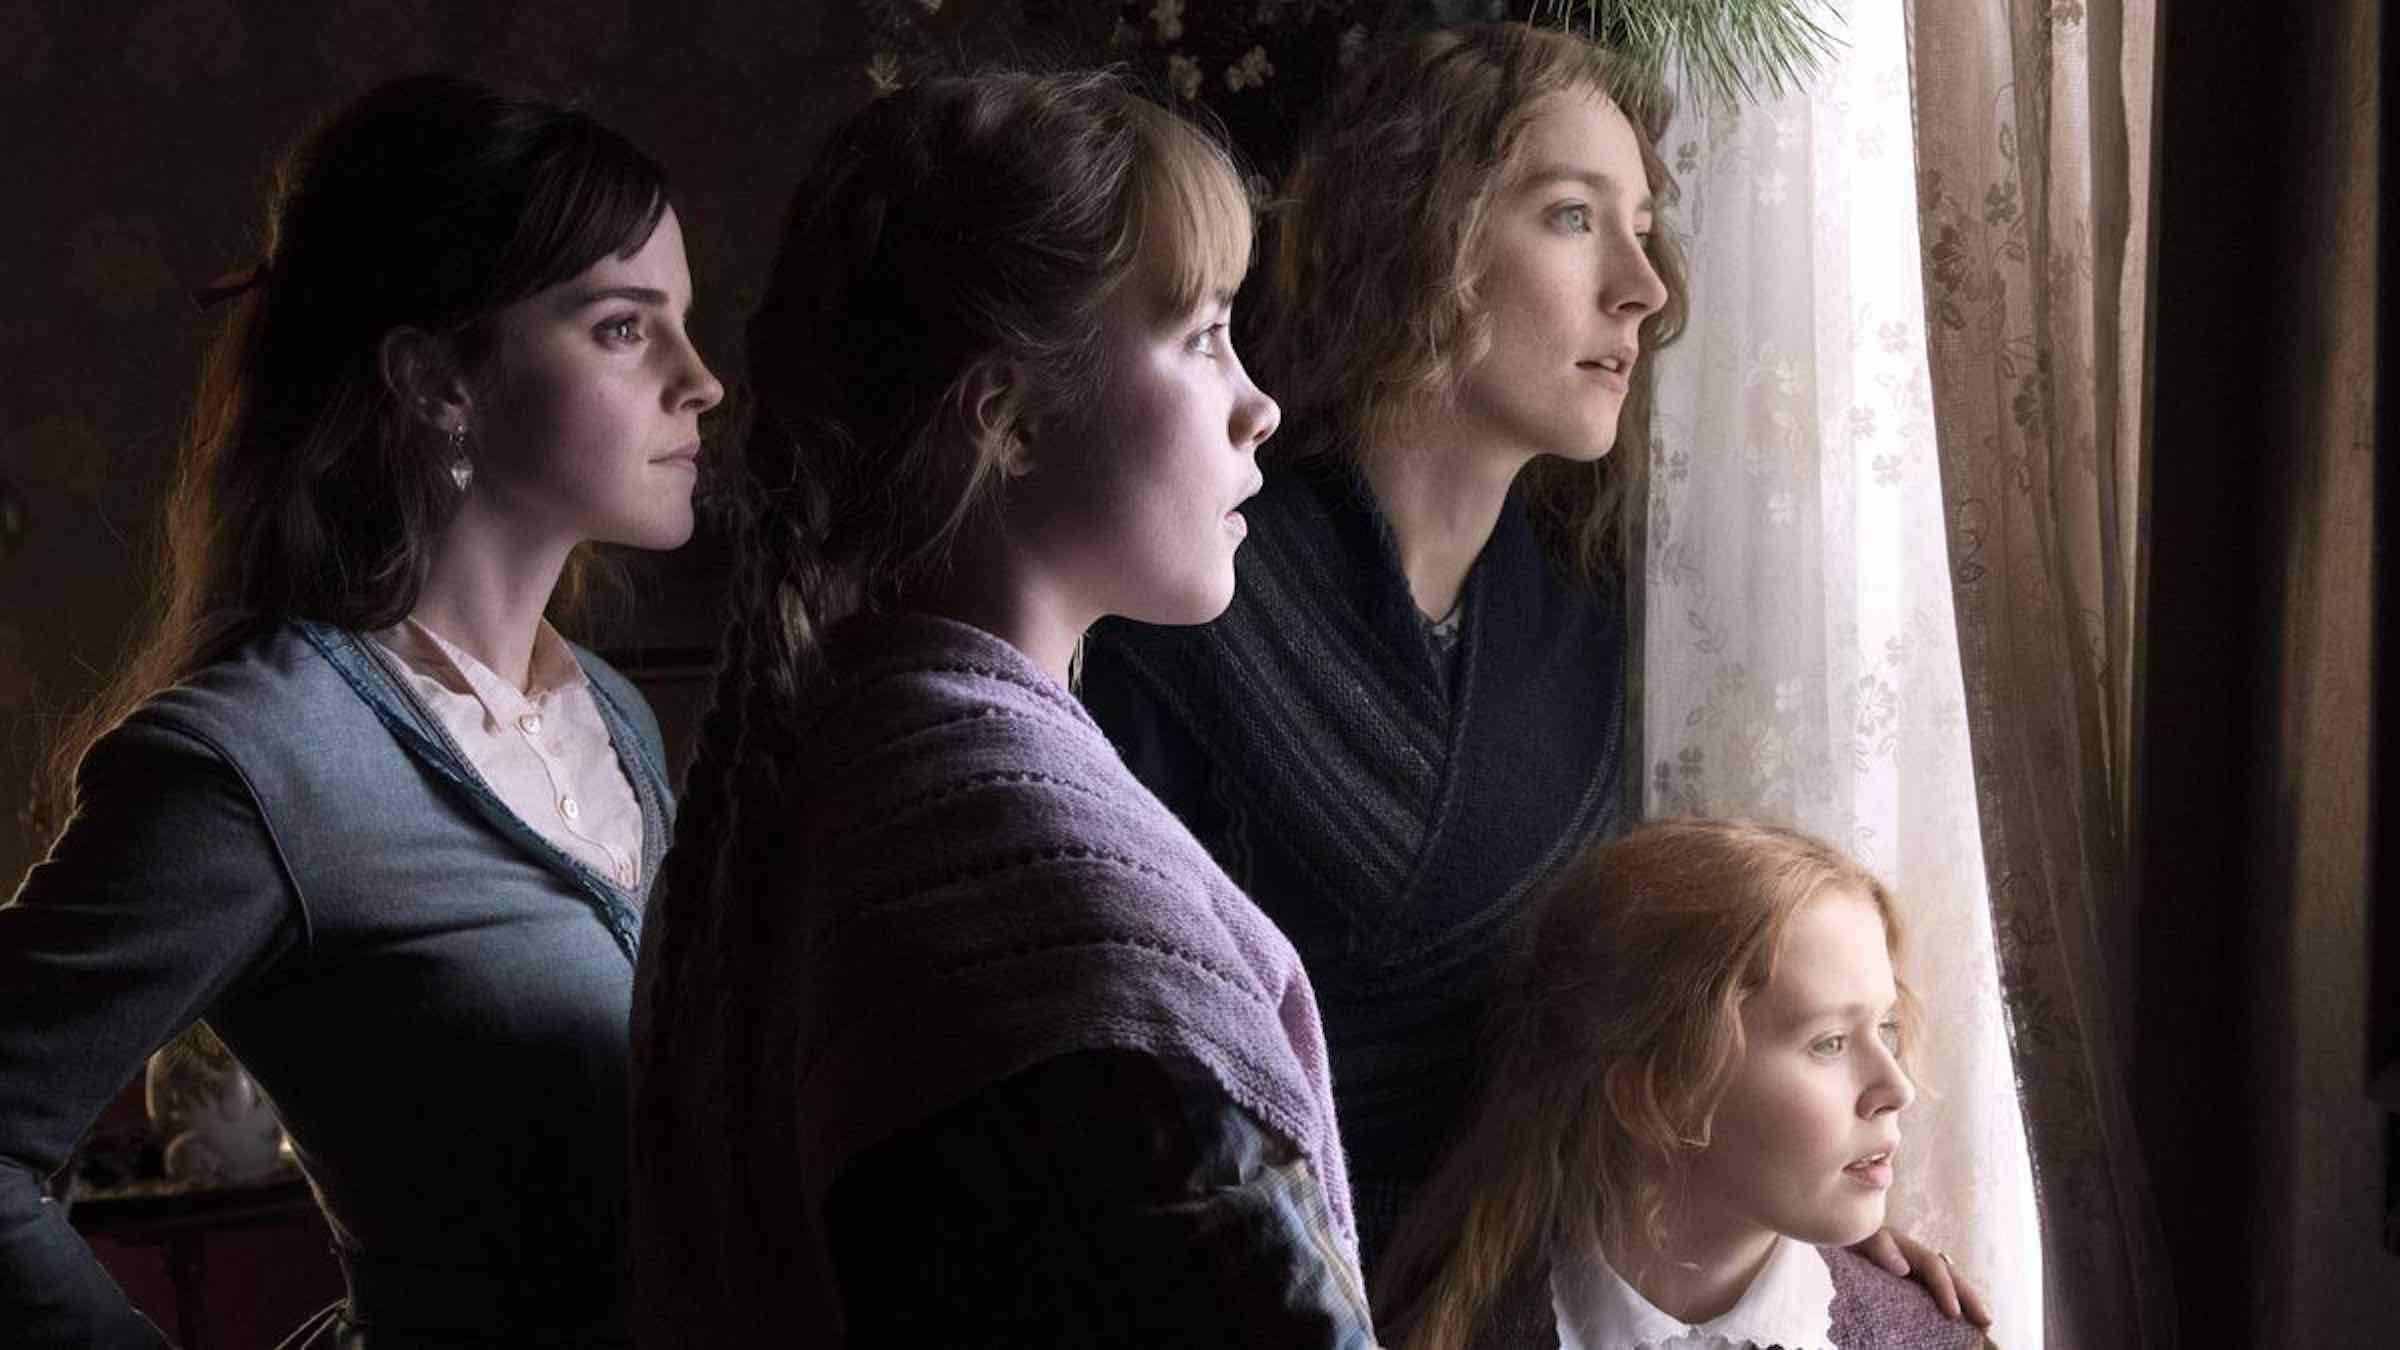 Greta Gerwig’s adaptation of 'Little Women' is one of those perfect films. Here are some quotes from 'Little Women' to live your life by.